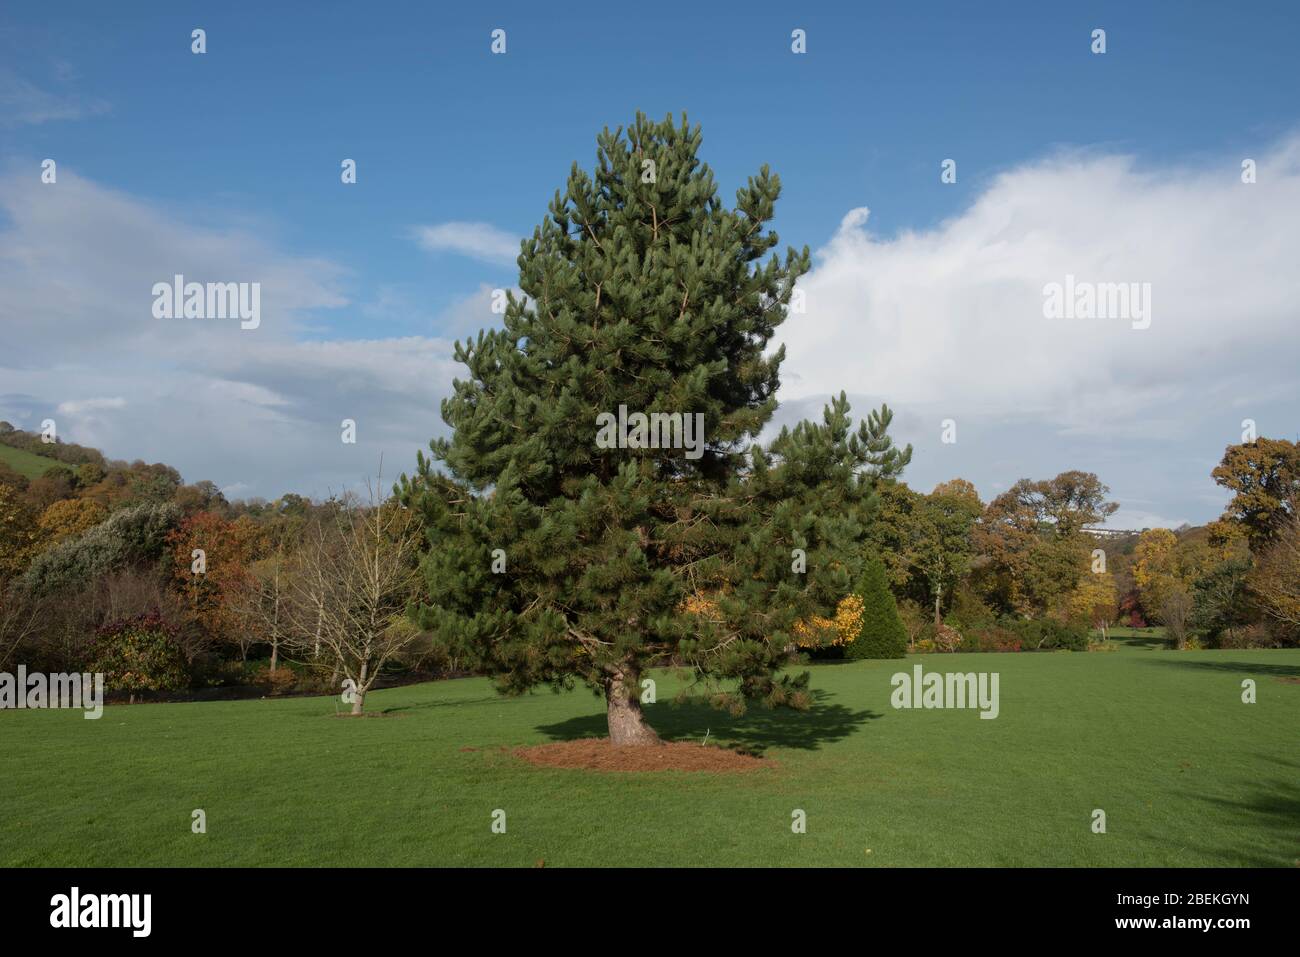 Green Foliage of the Austrian Pine or Black Pine Tree (Pinus nigra) with a Cloudy Blue Sky Background in a Garden Stock Photo